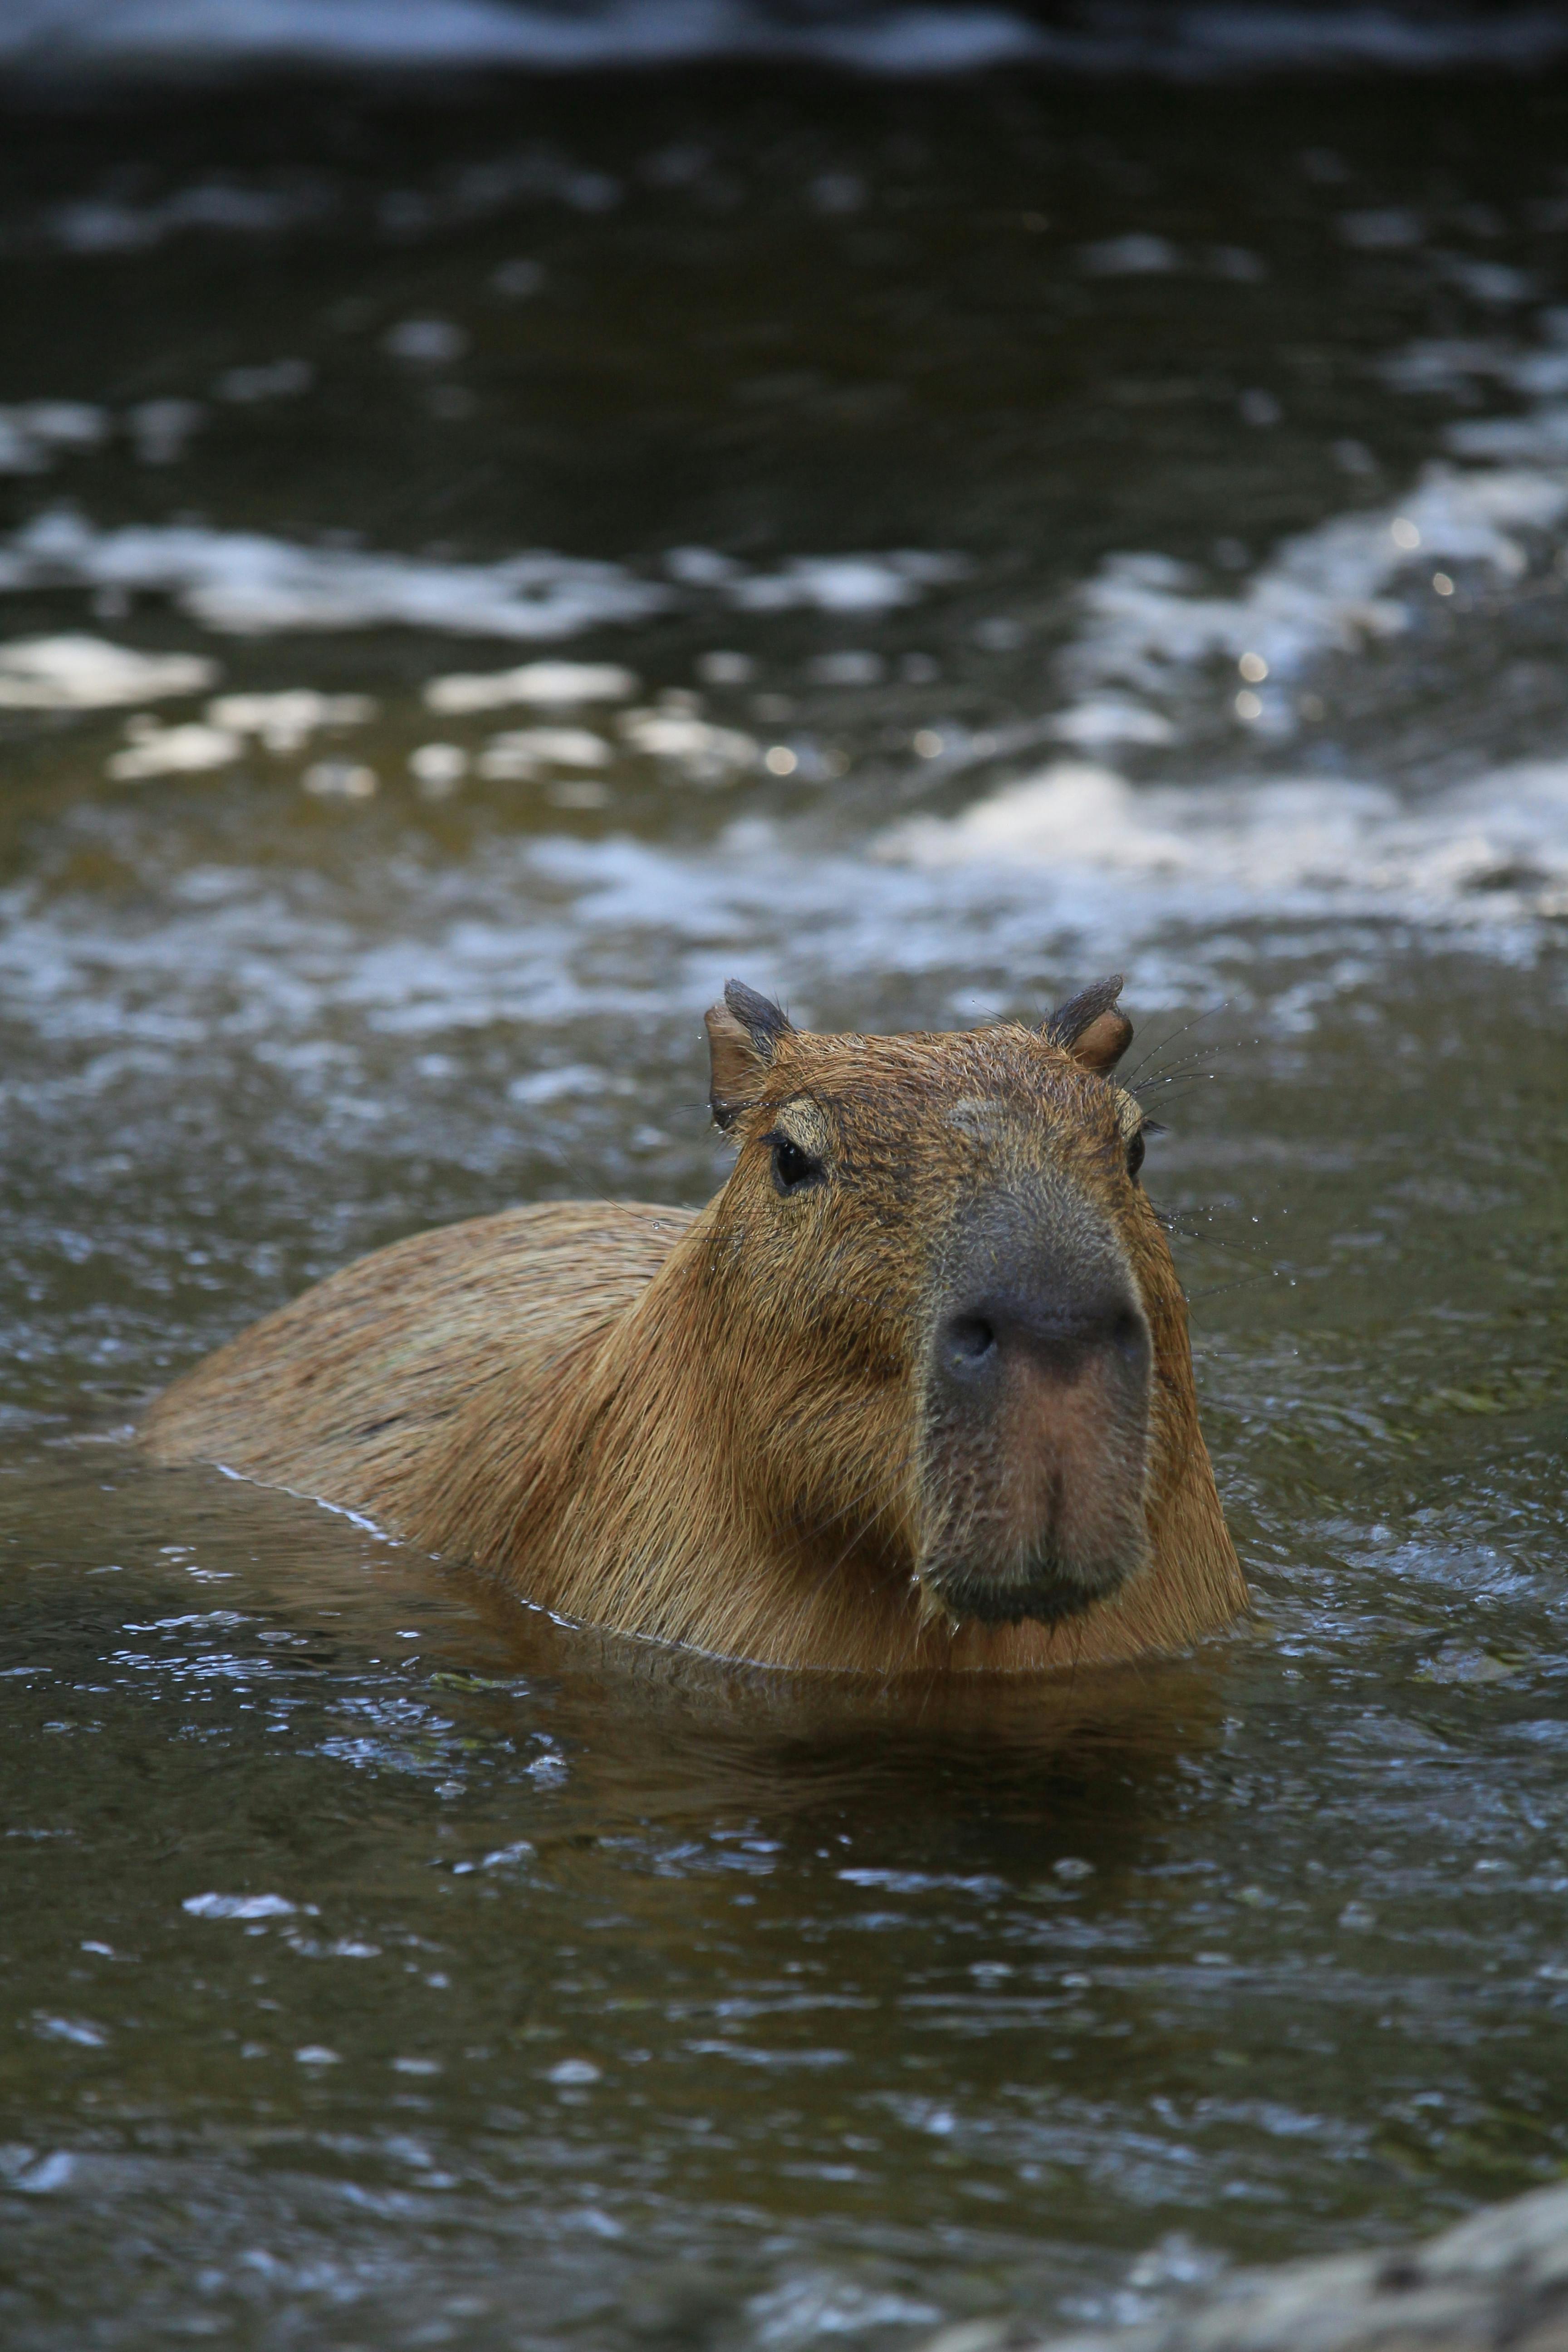 Buy Cute Capybara Phone Wallpaper for Iphone and Android Online in India   Etsy